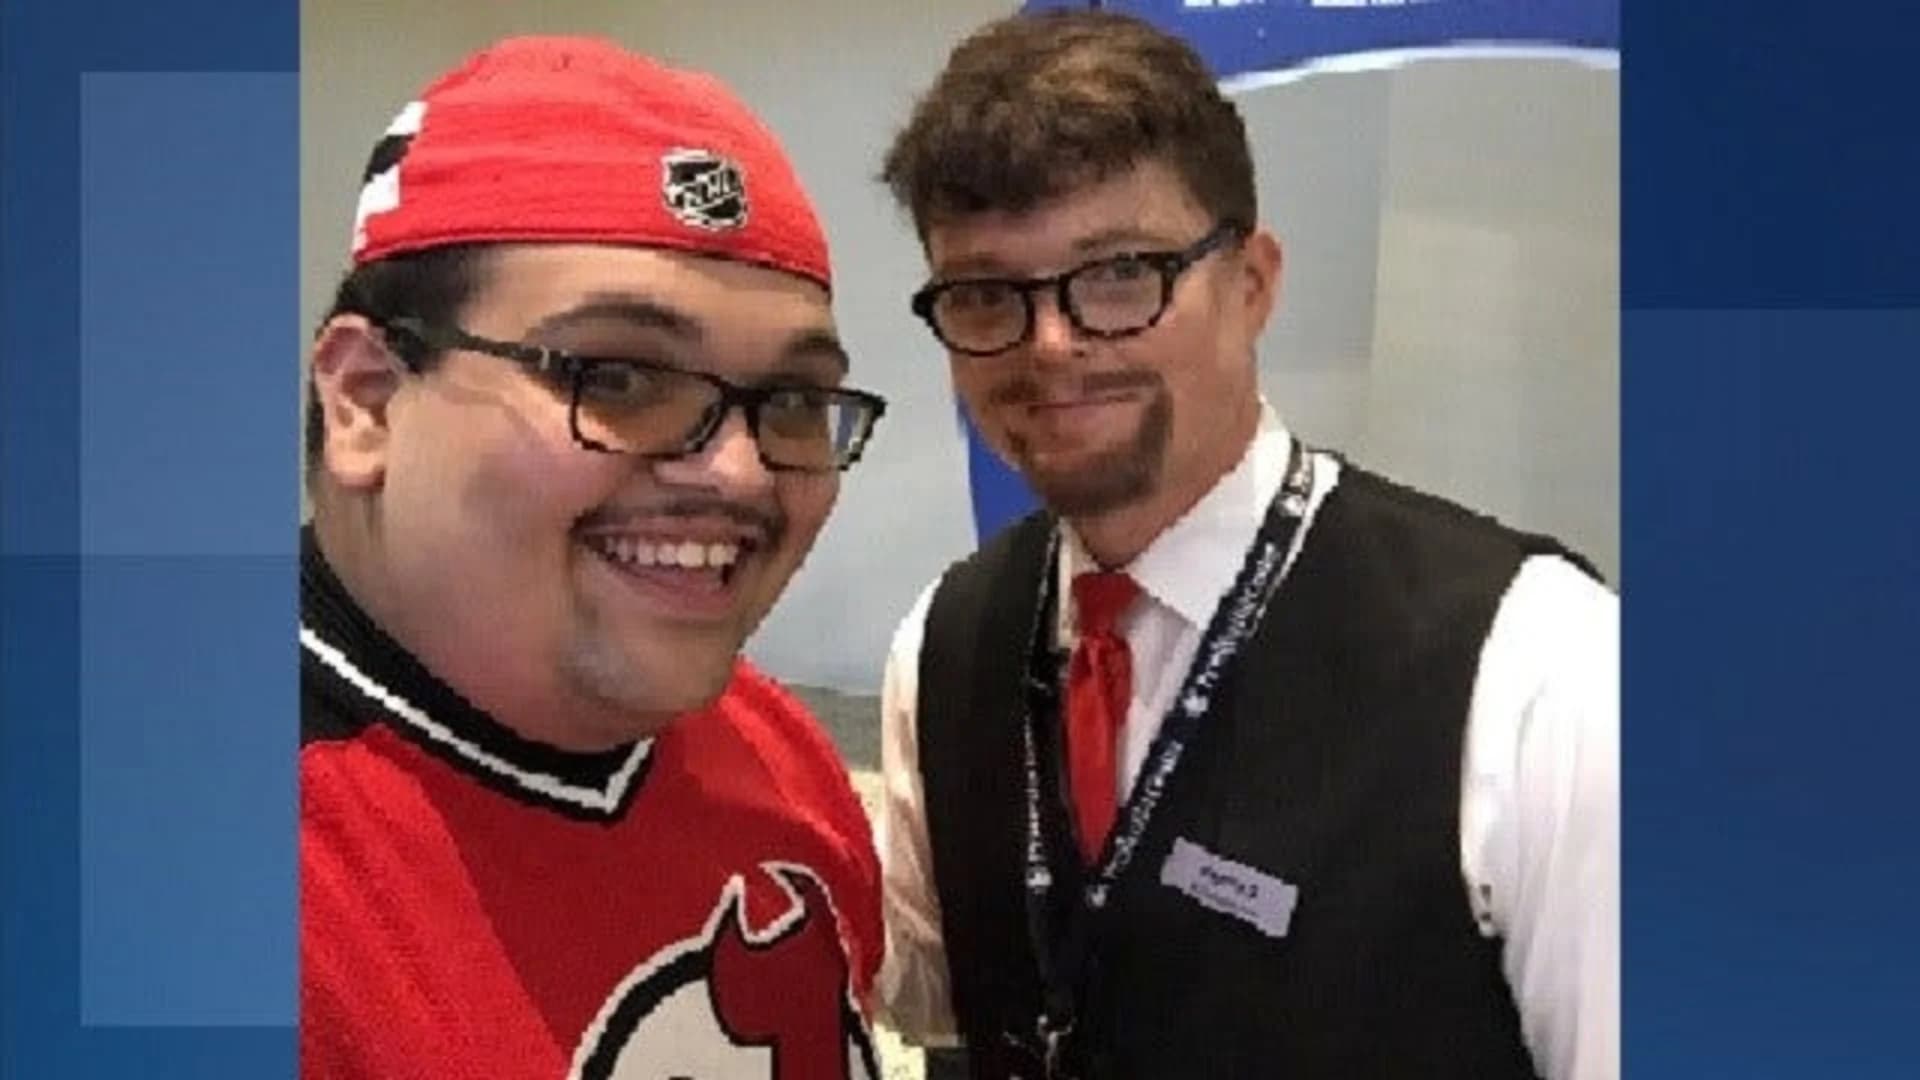 Devils’ Cory Schneider, disguised as usher, surprises fan with jersey